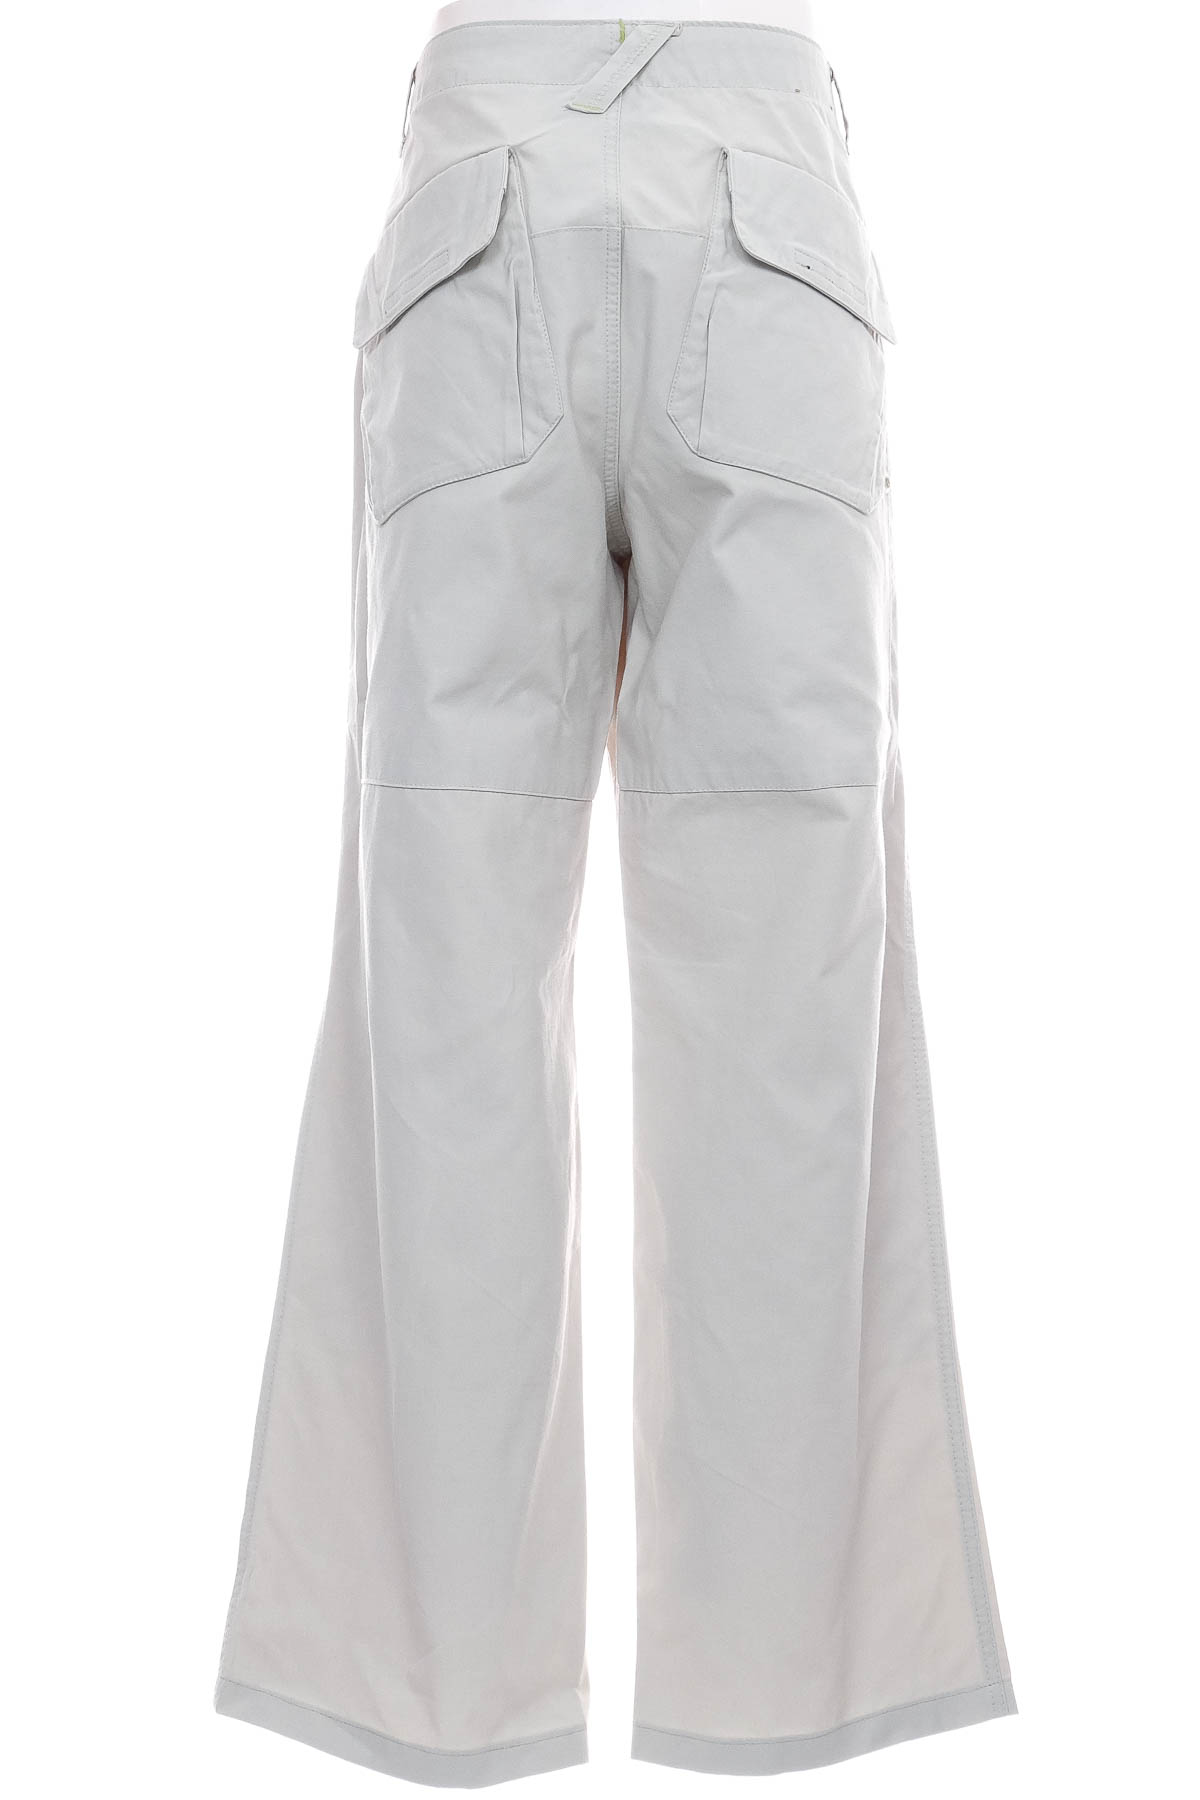 Men's trousers - Timberland - 1